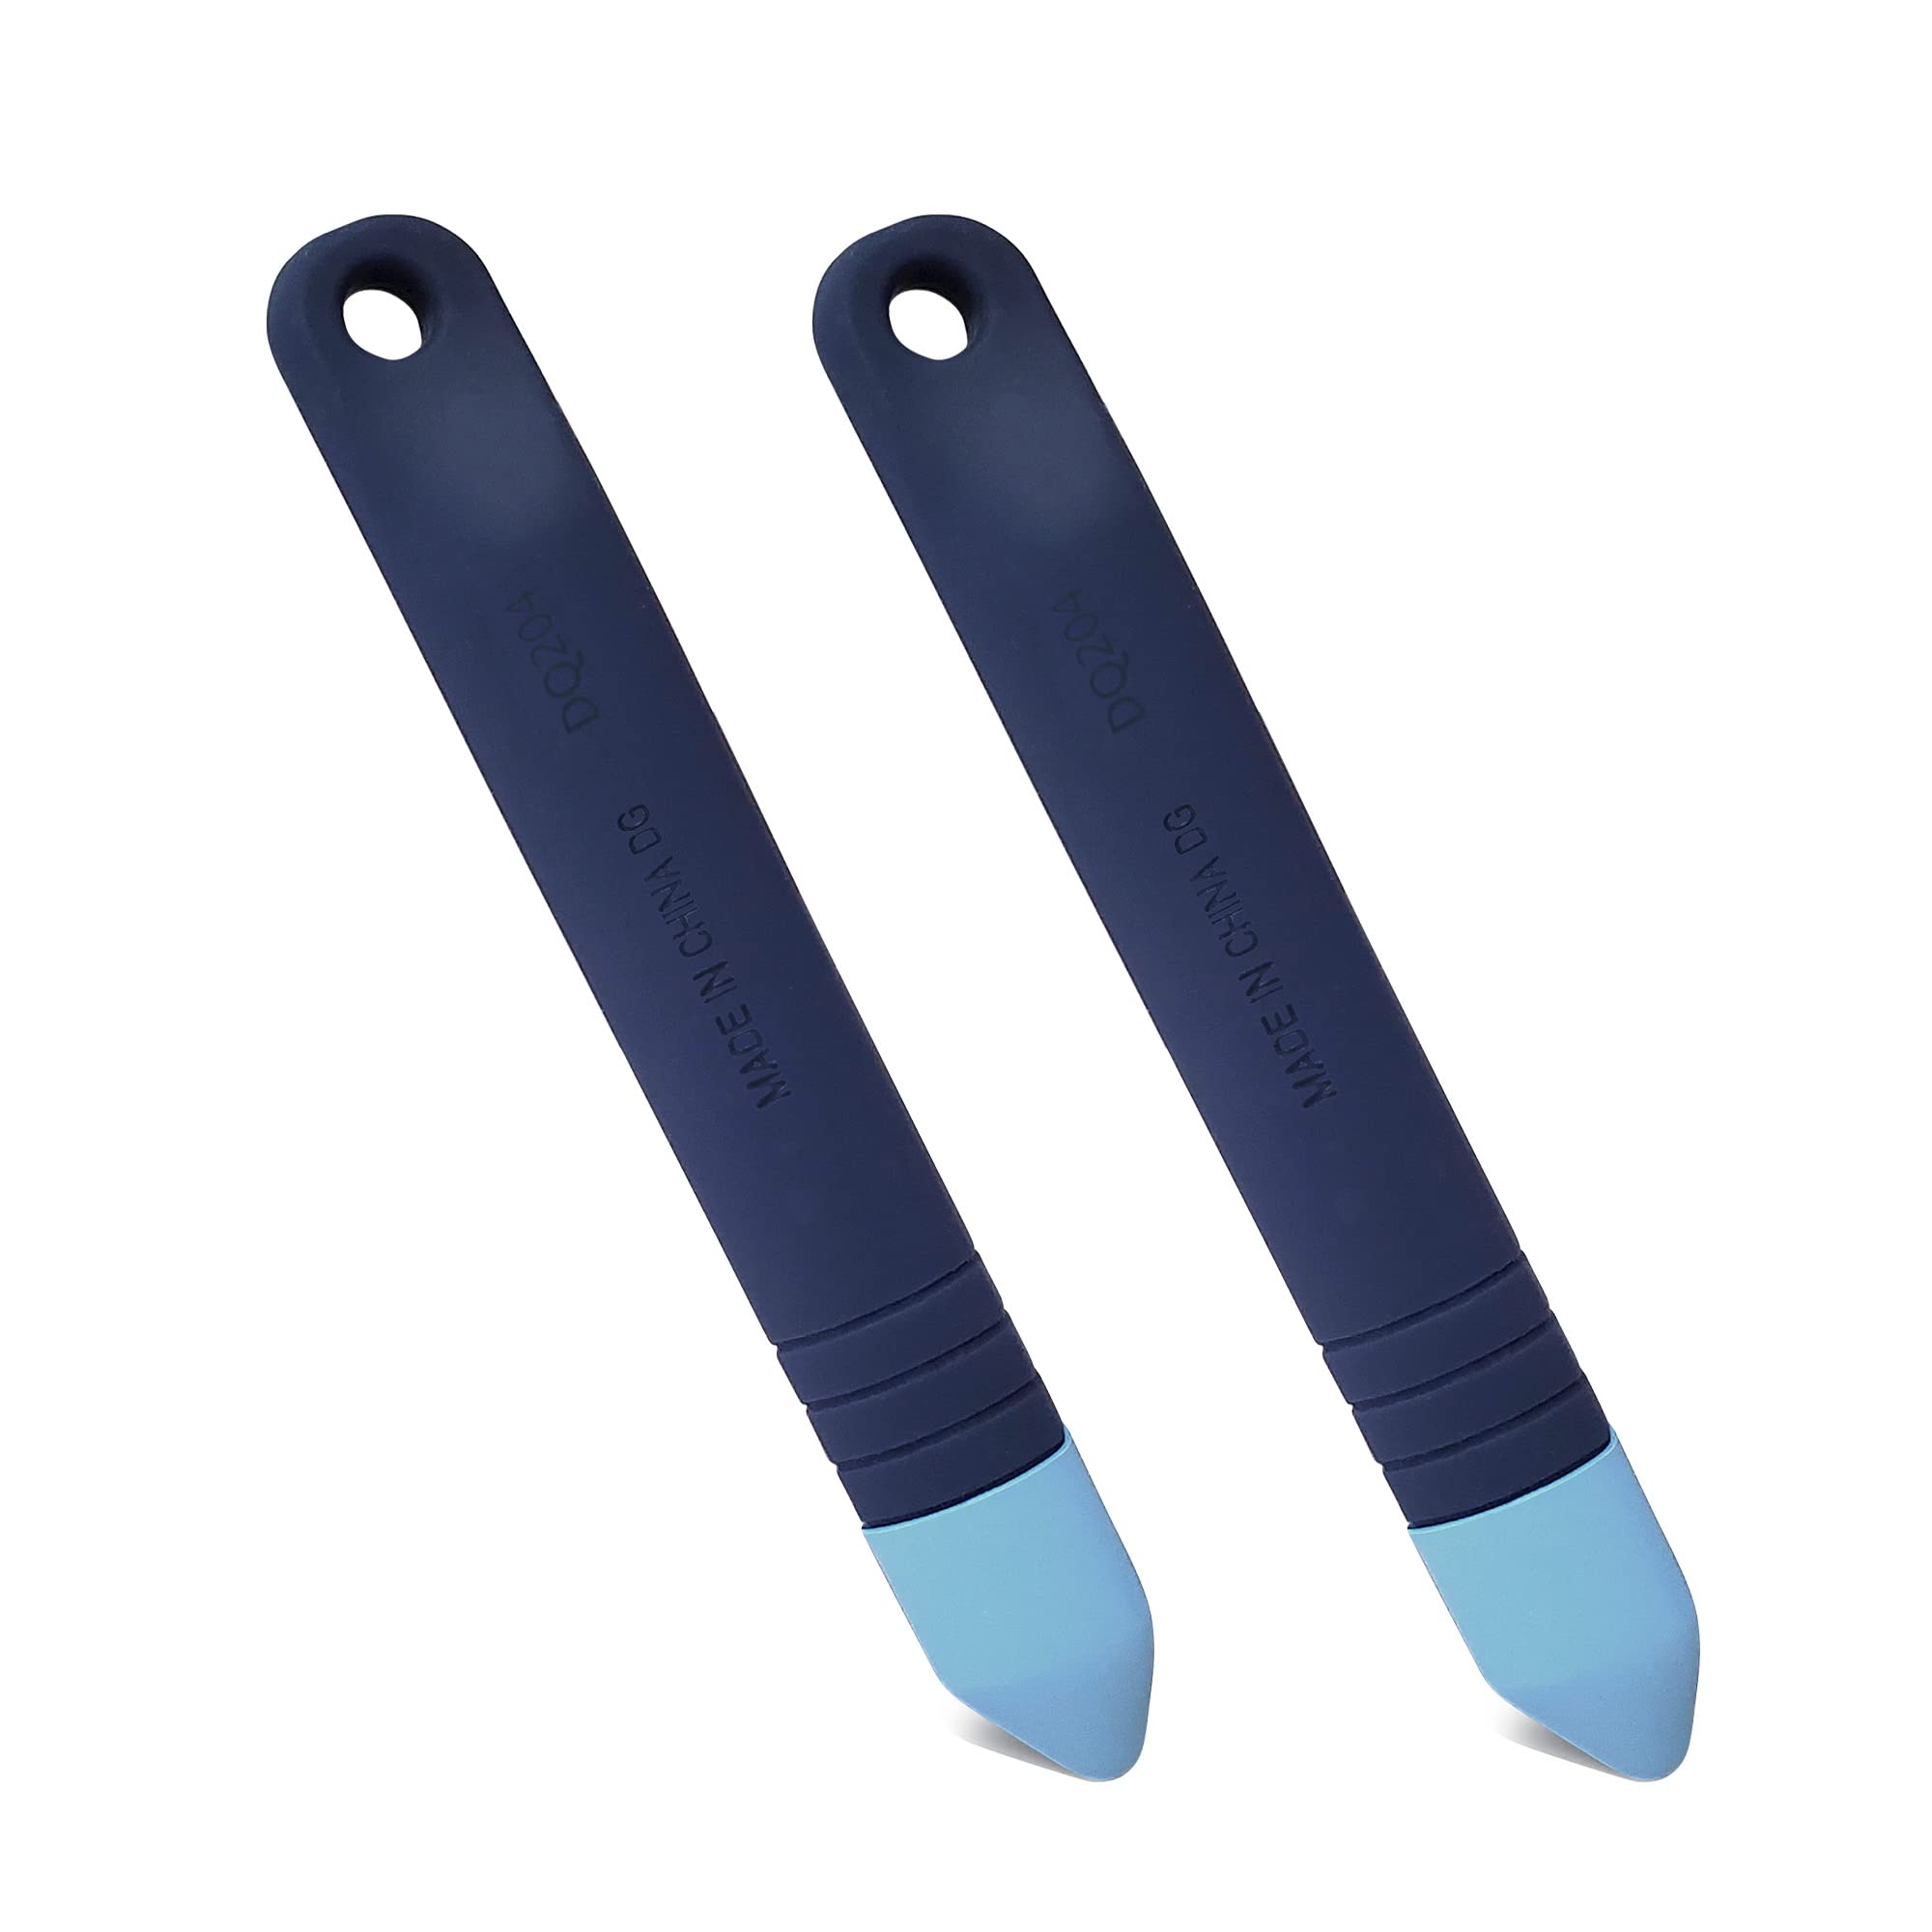 Amazon Kid-Friendly Tablet Stylus with Tether, Blue 2-pack